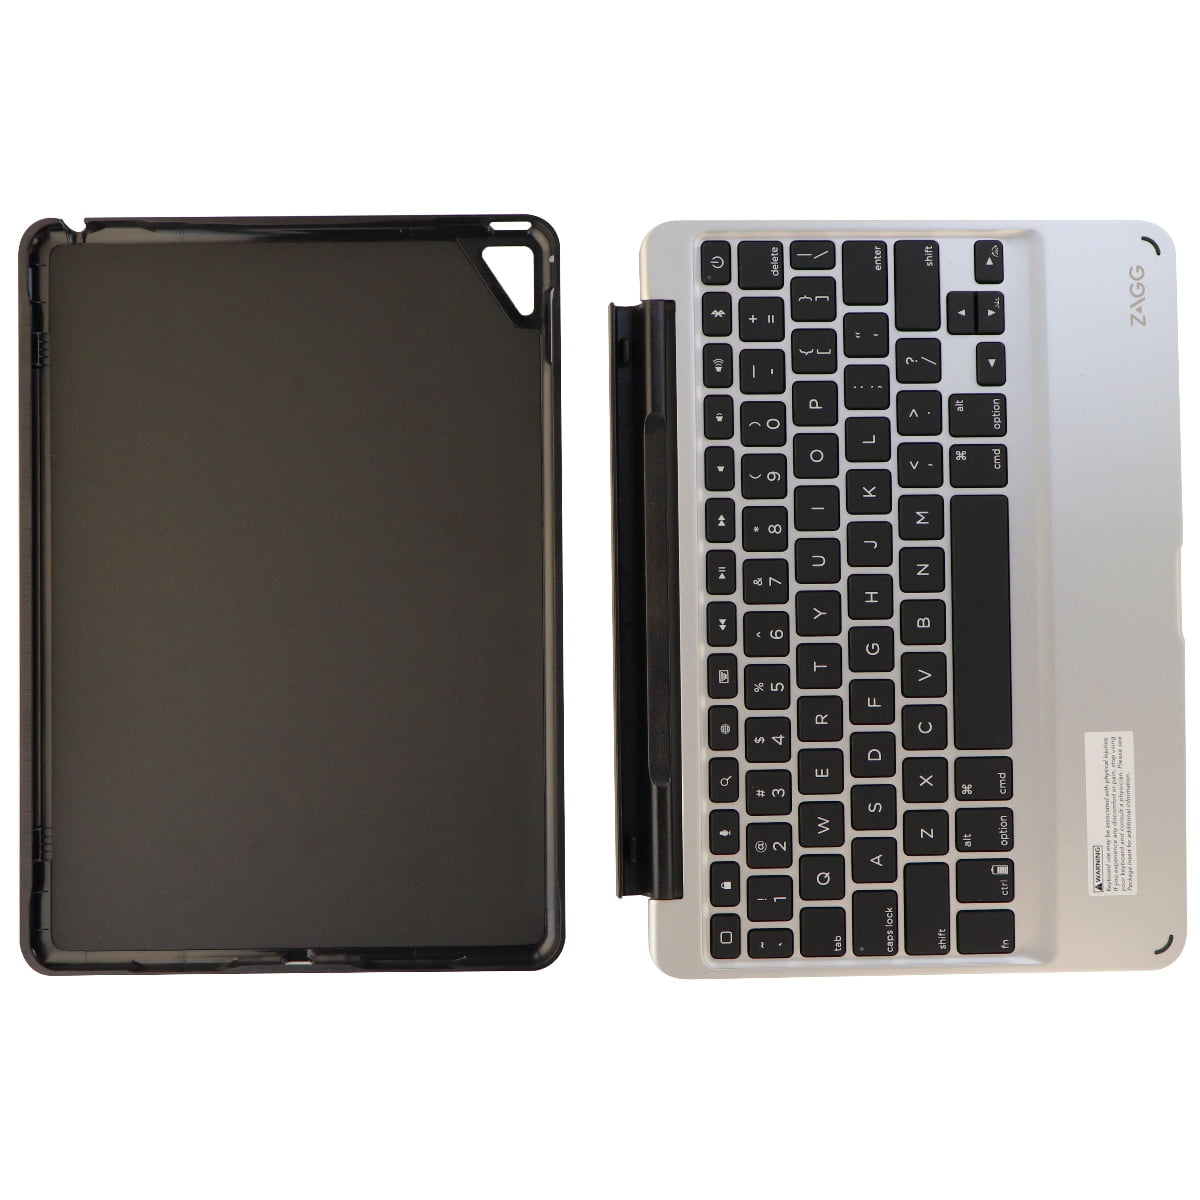 Black Hinged with Detachable Bluetooth Keyboard for Apple iPad Pro 9.7 ZAGG Slim Book Ultrathin Case 